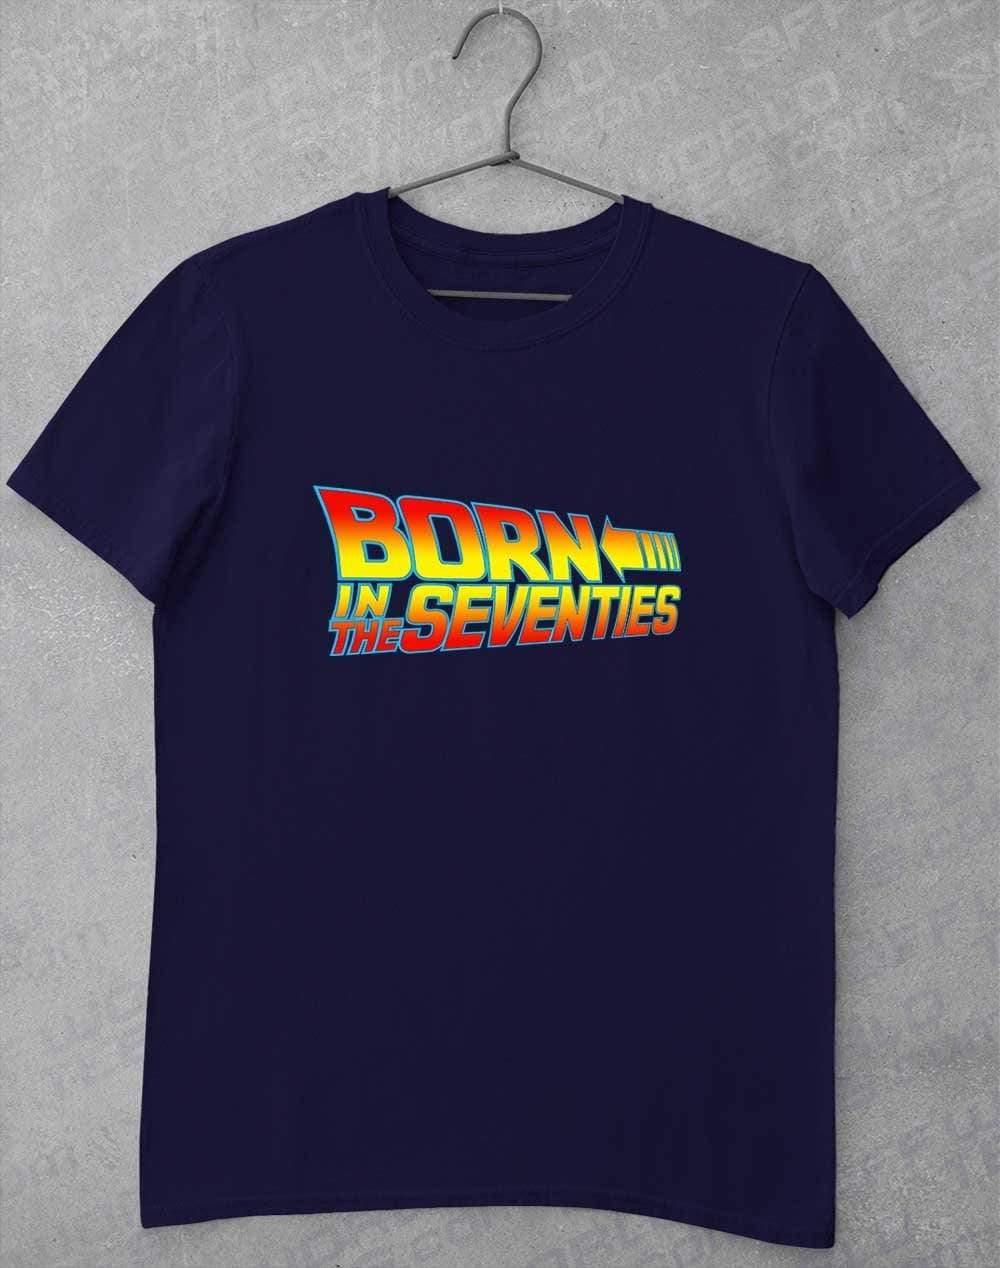 Born in the... (CHOOSE YOUR DECADE!) T-shirt THE SEVENTIES - Navy / S  - Off World Tees